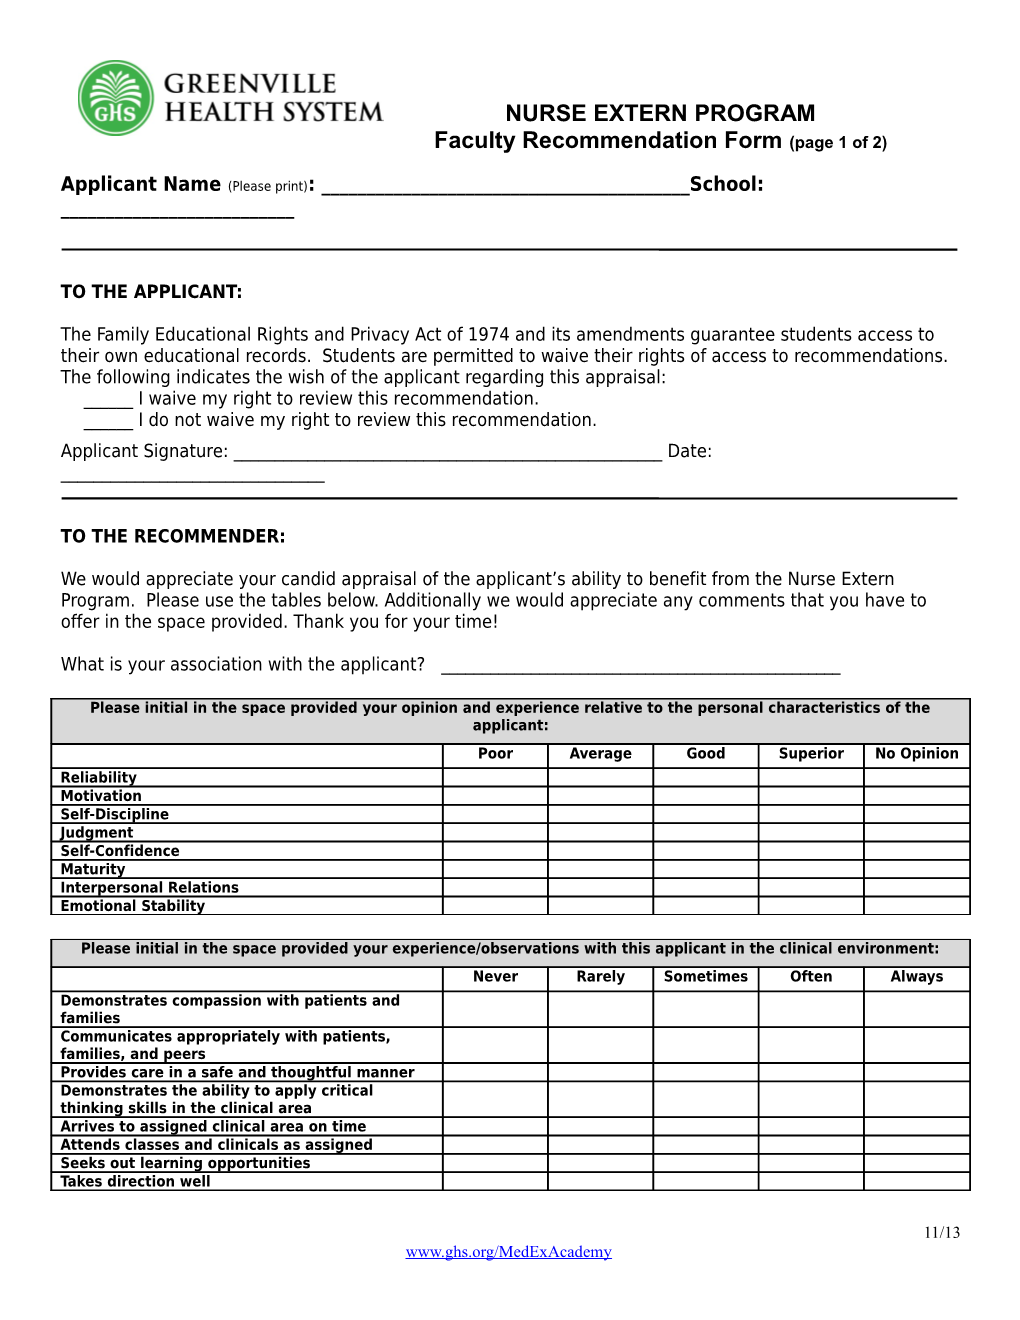 Faculty Recommendation Form (Page 1 of 2)